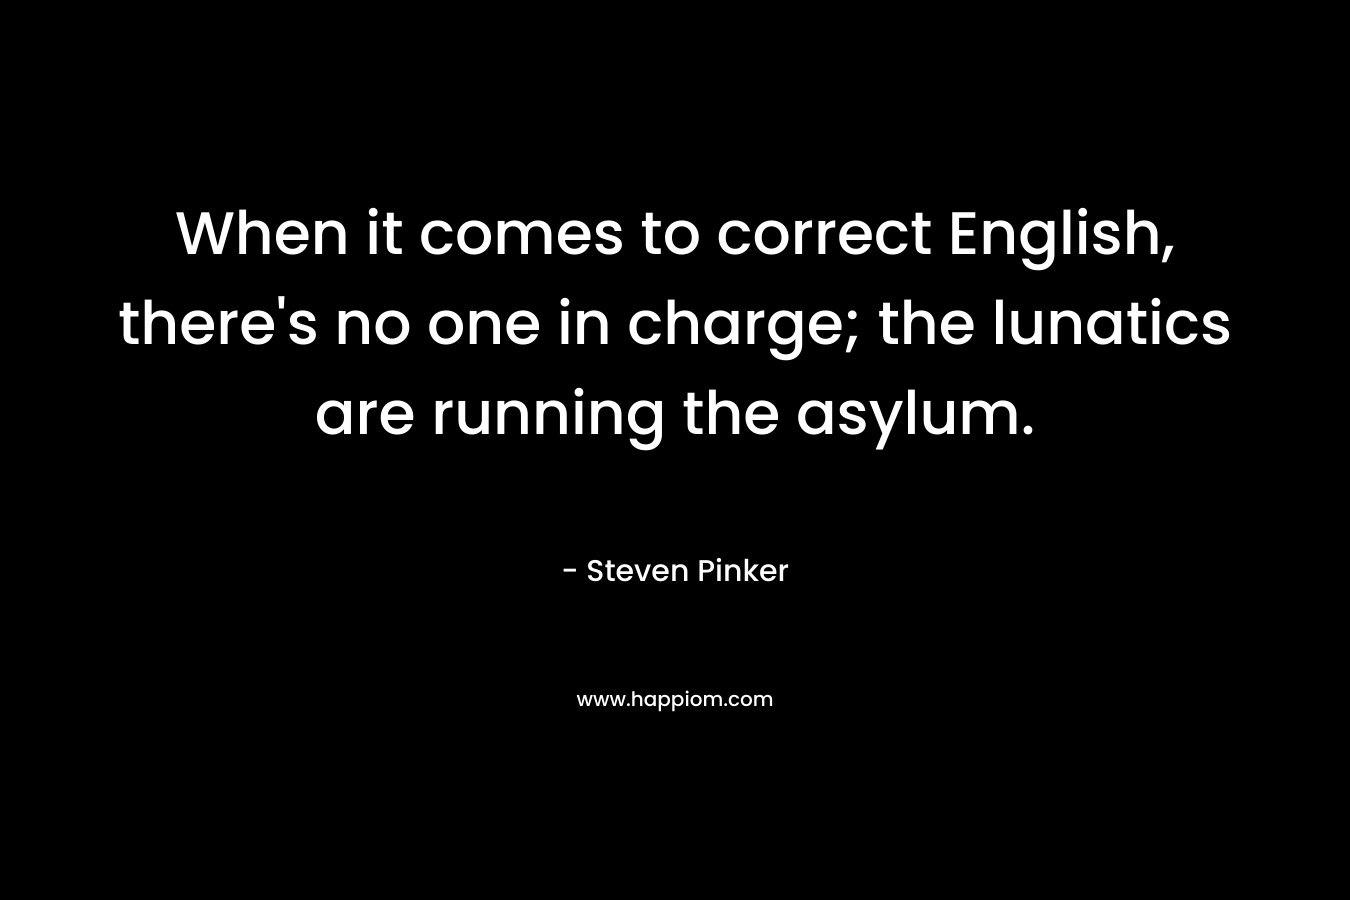 When it comes to correct English, there's no one in charge; the lunatics are running the asylum.